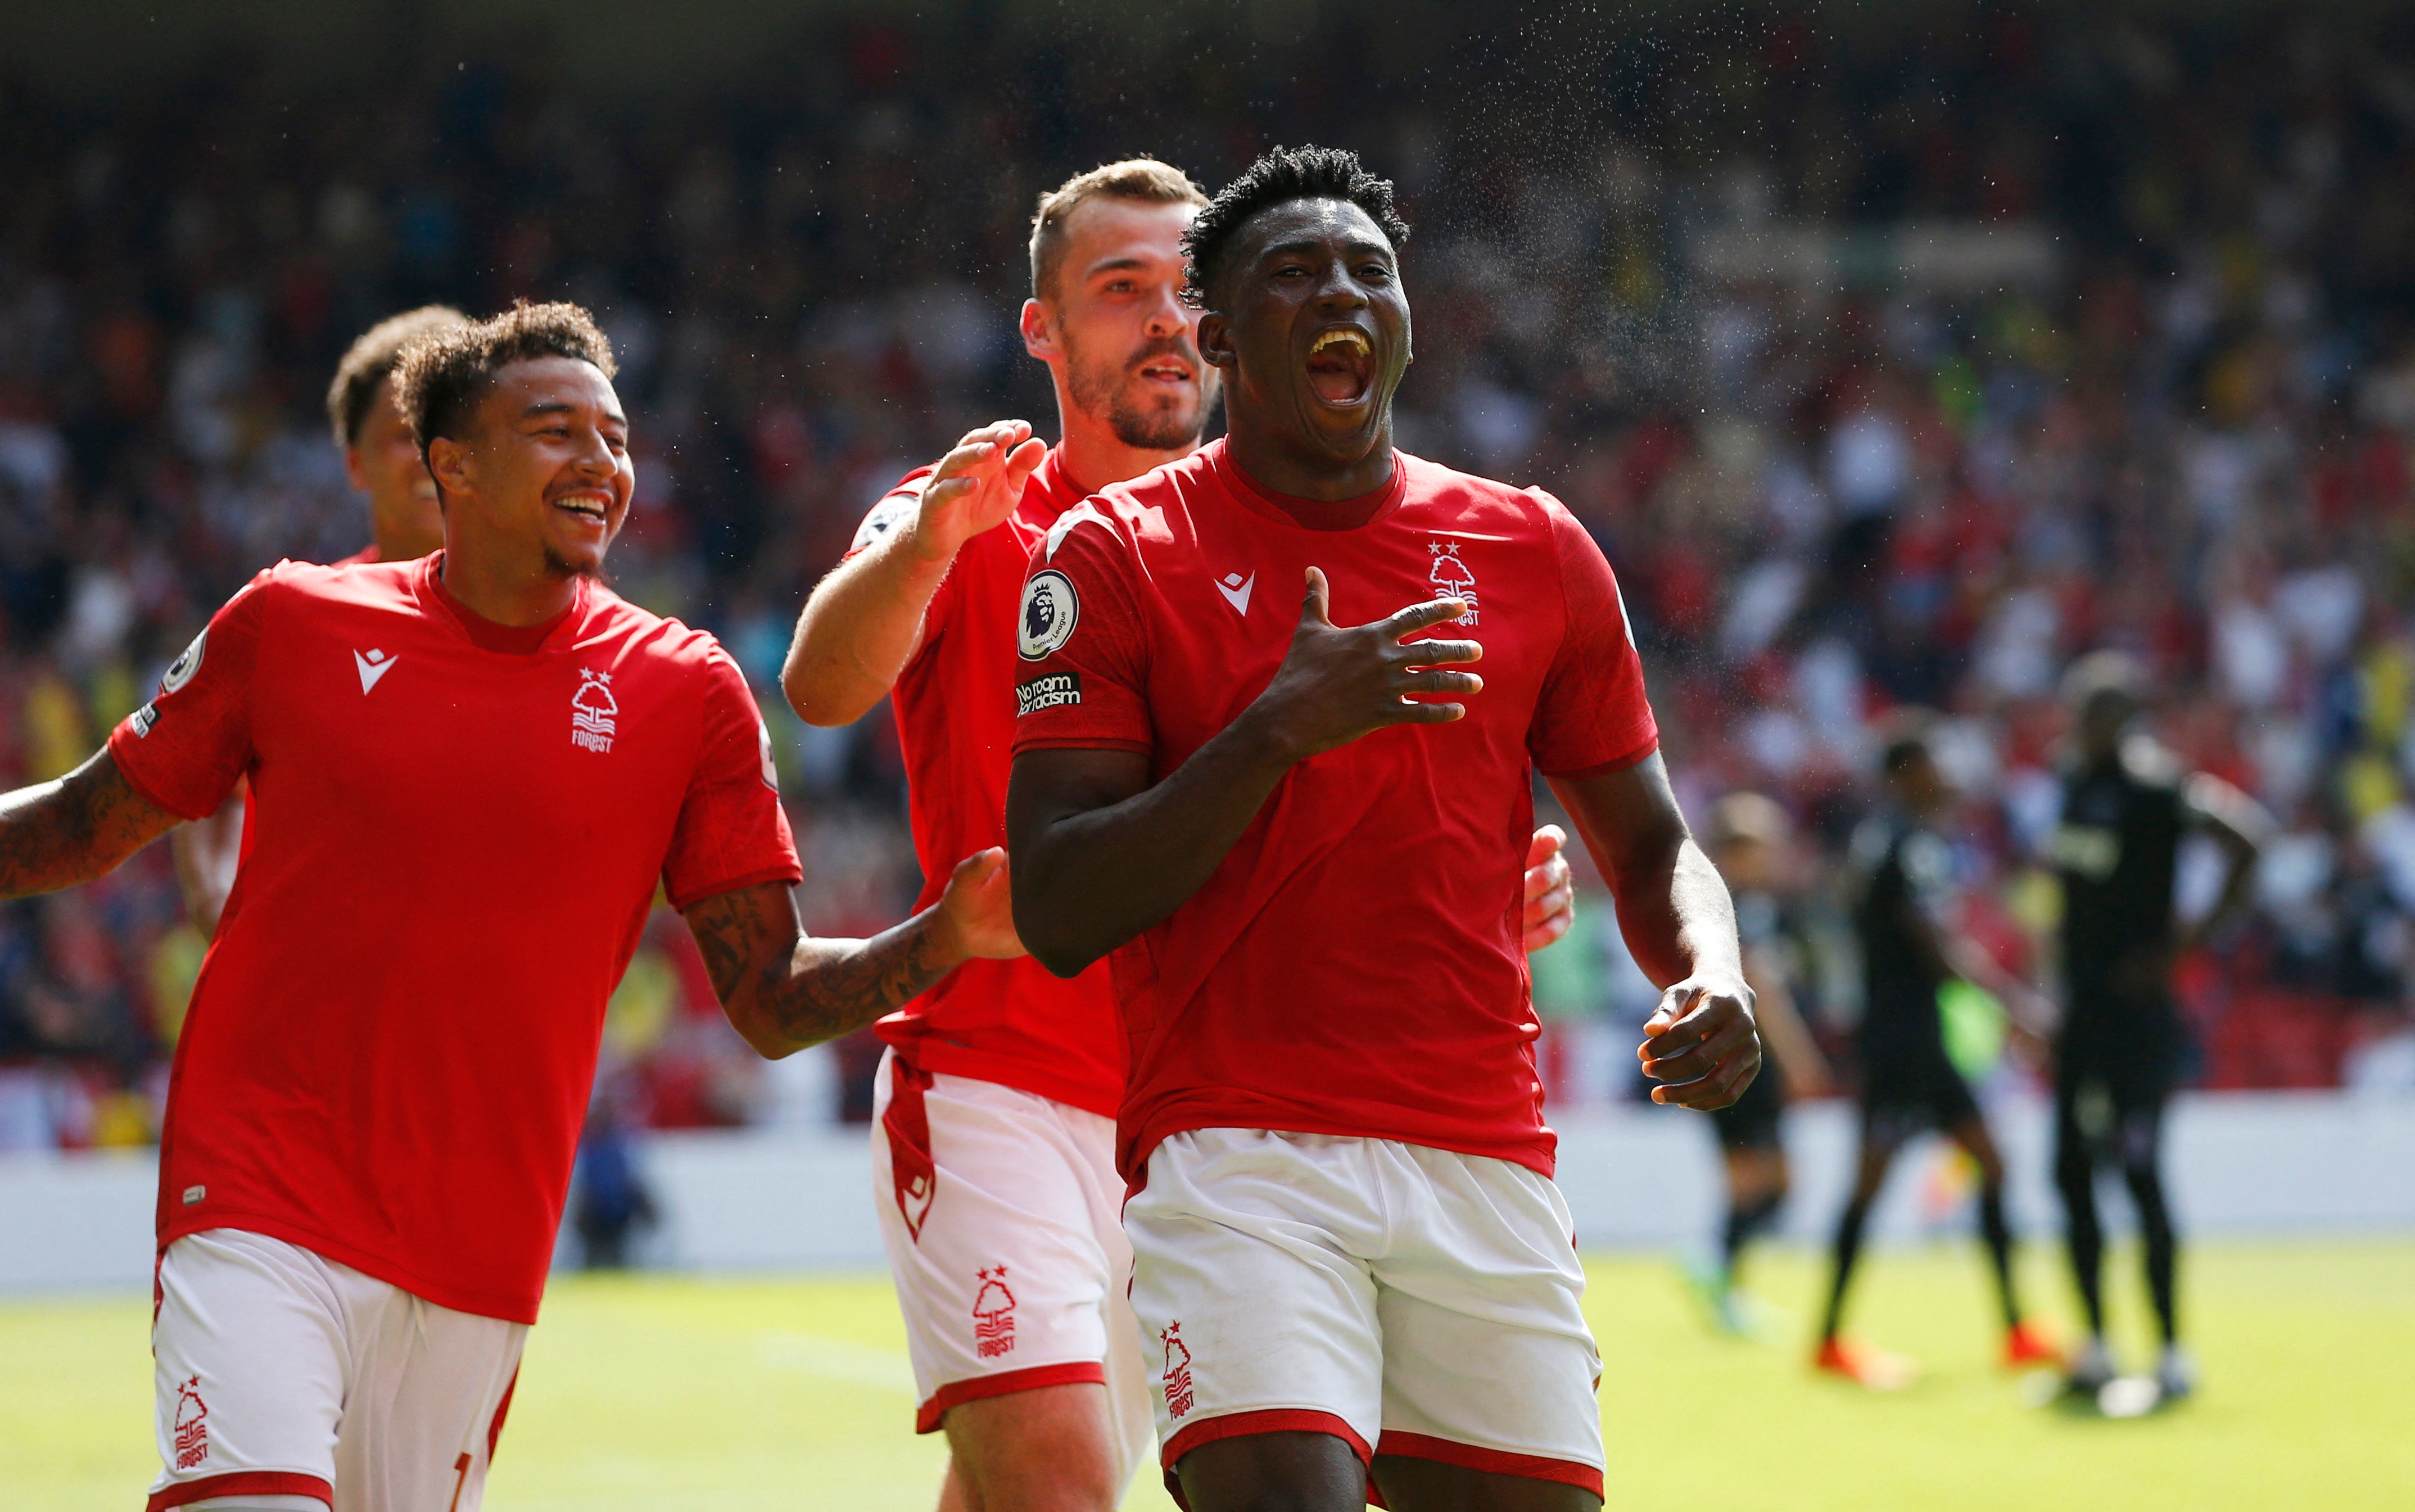 Nottingham Forest's Taiwo Awoniyi celebrates scoring their first top-flight goal for 23 years